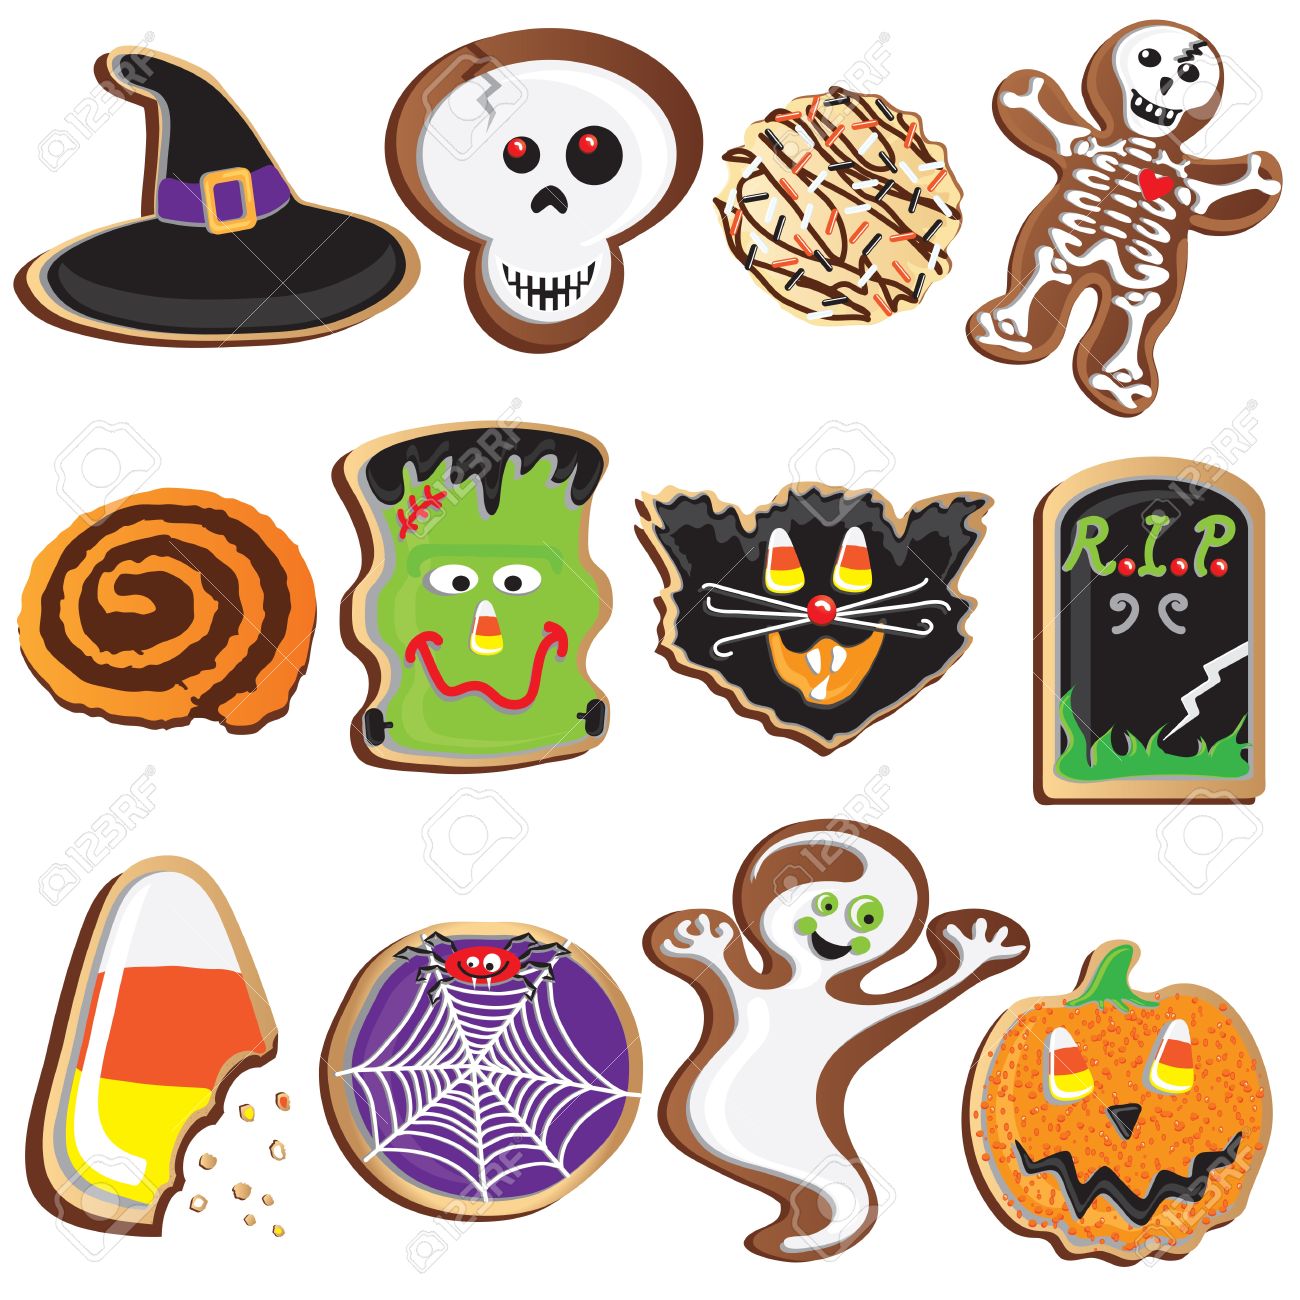 Cute Halloween Cookies Clipart Elements and Icons.